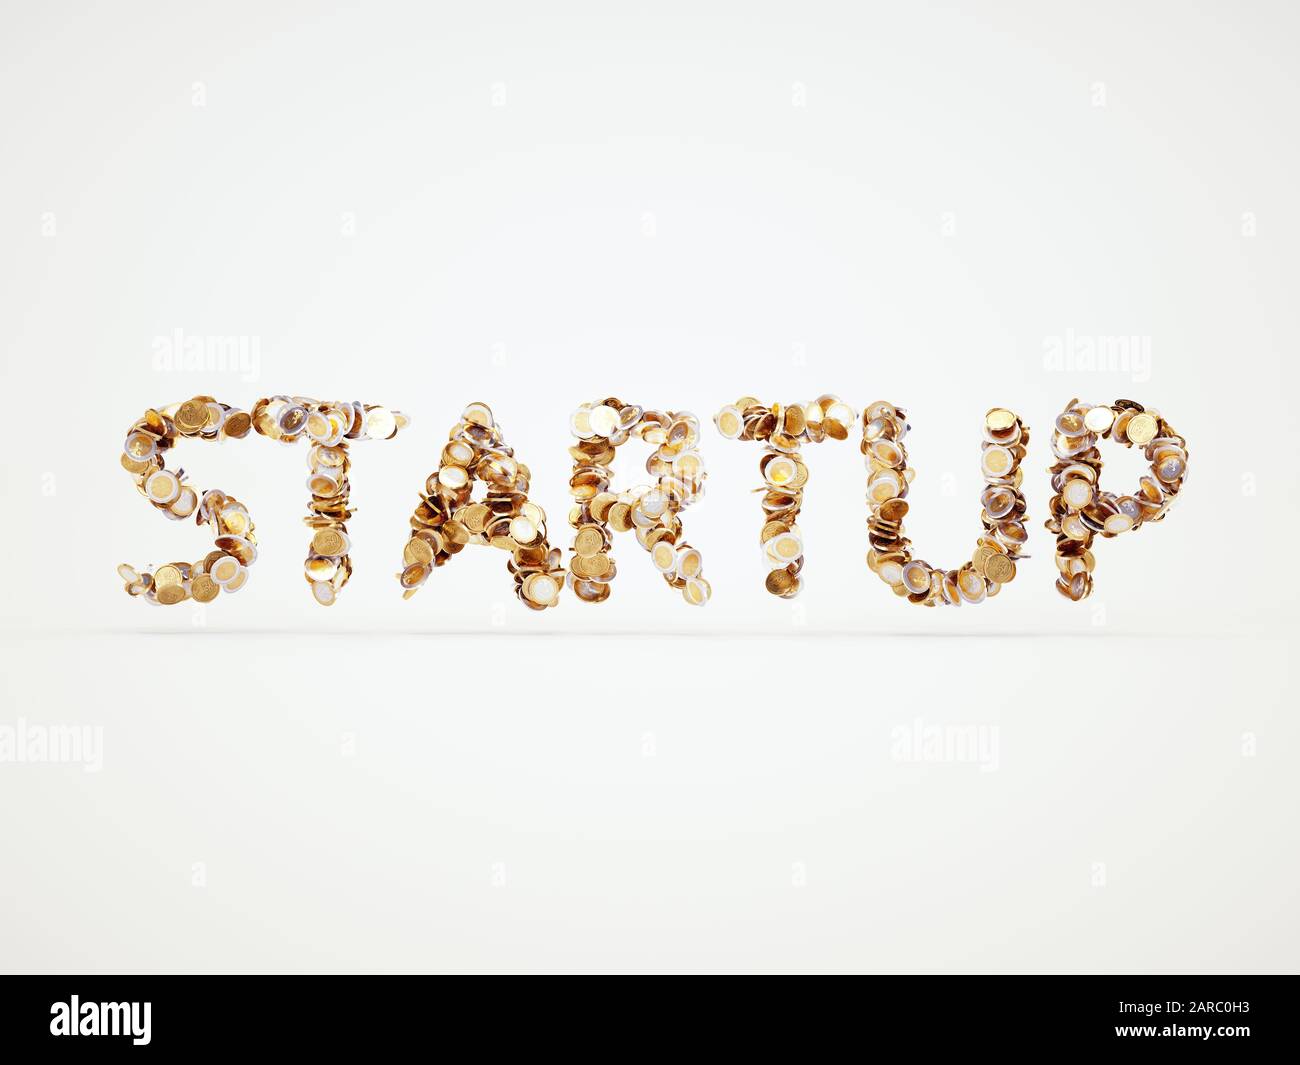 Startup concept isolated on white background Stock Photo